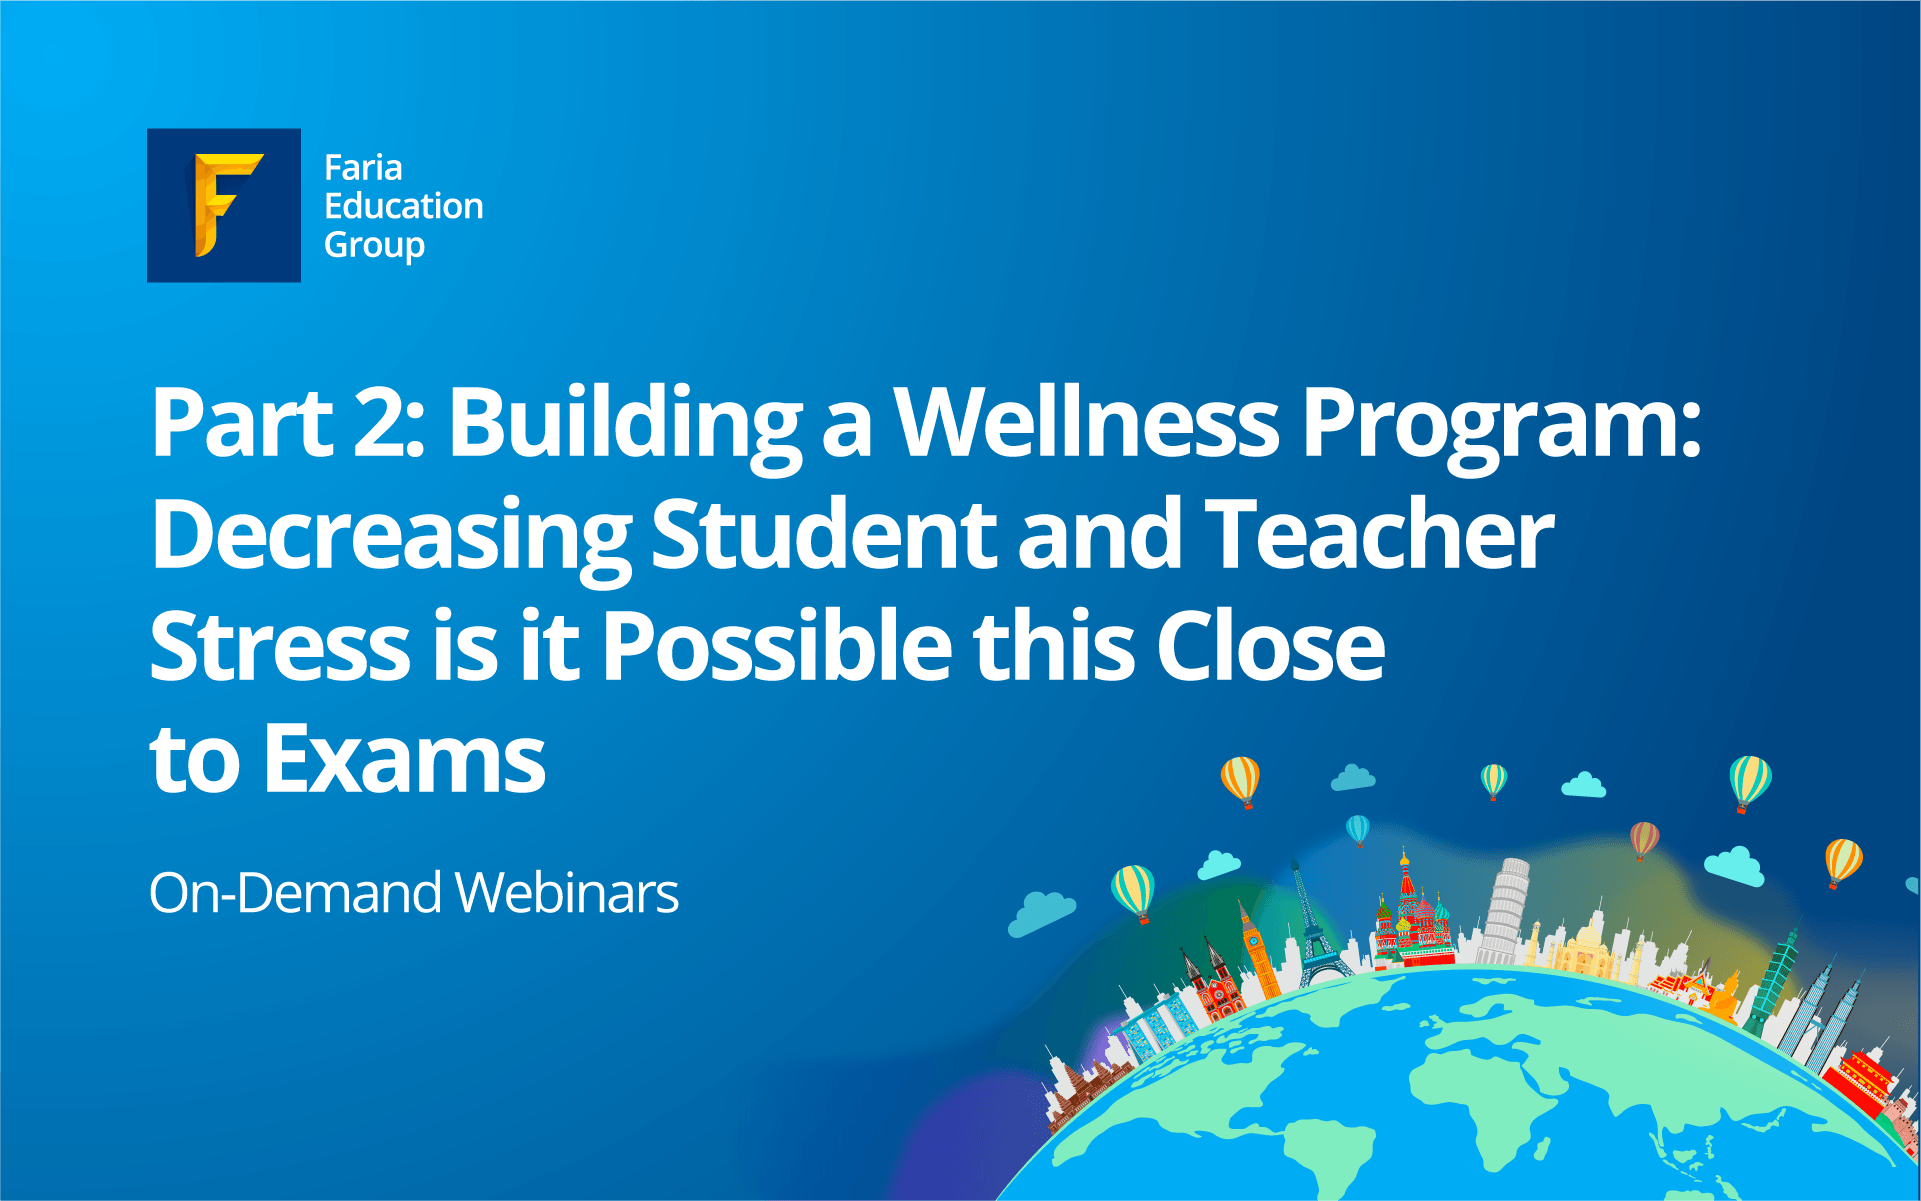 Part 2: Building a Wellness Program: Decreasing Student and Teacher Stress Is it Possible This Close to Exams